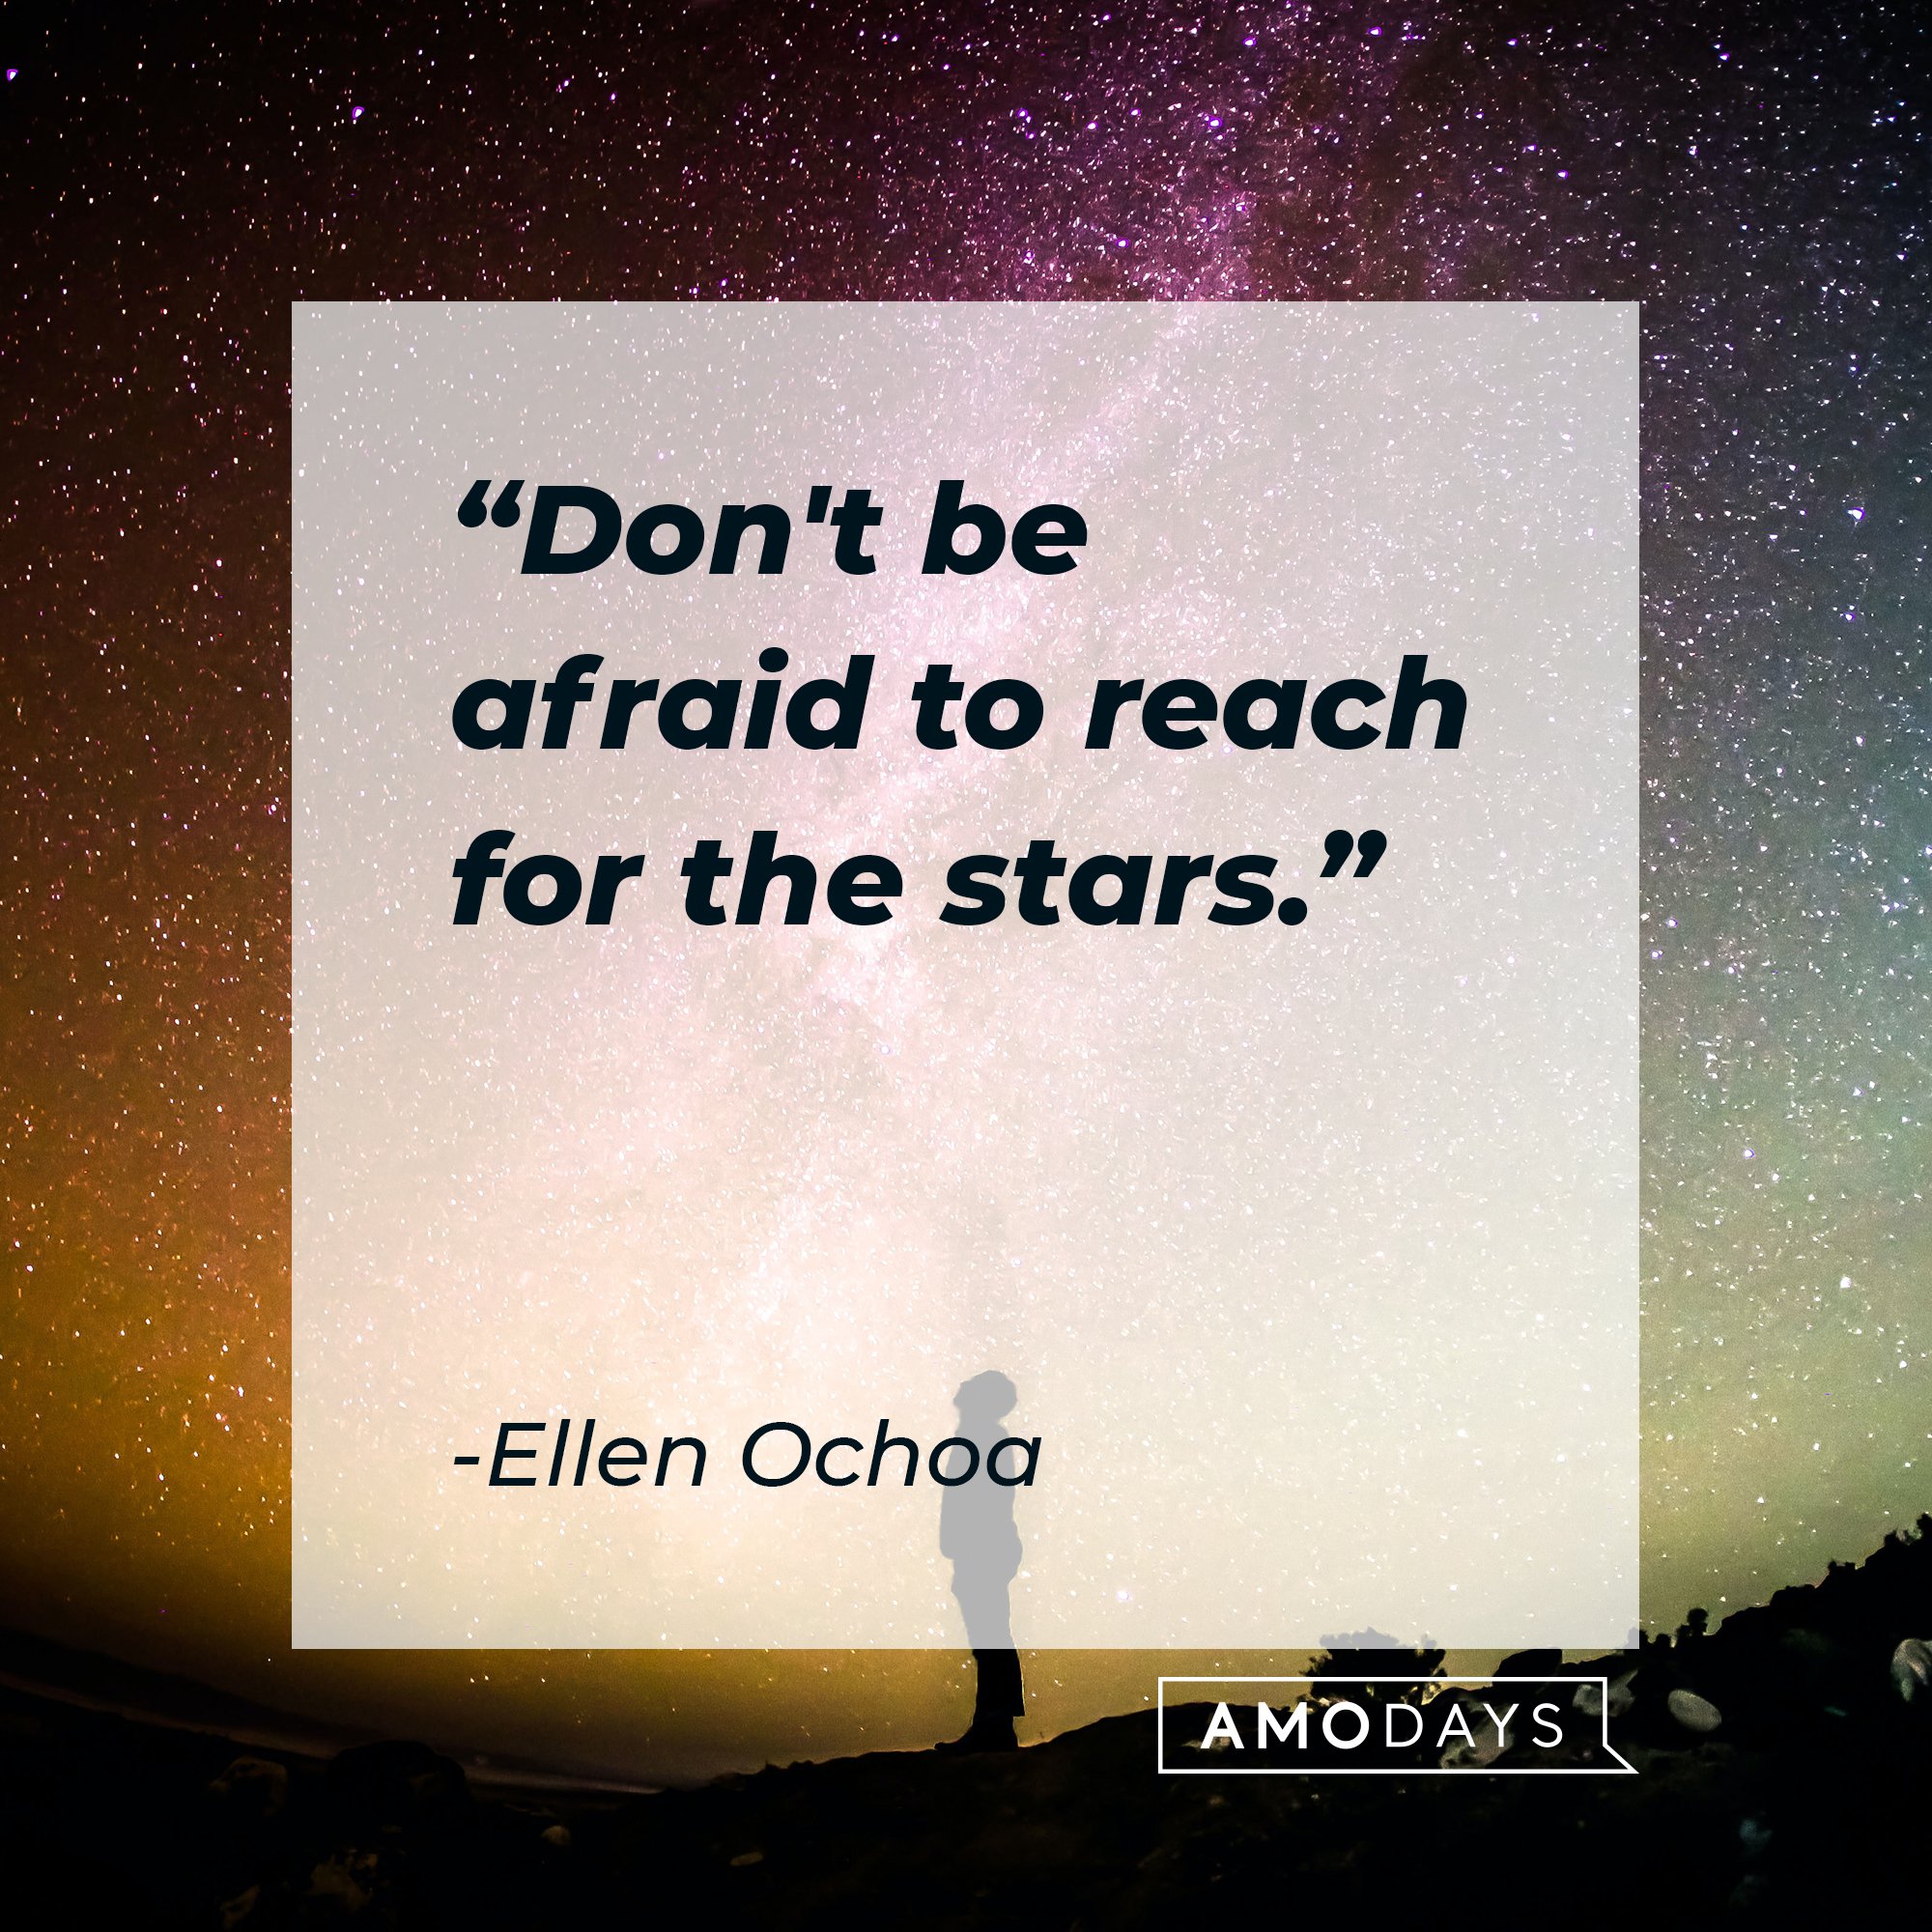  Ellen Ochoa's quote: "Don't be afraid to reach for the stars." | Image: AmoDays